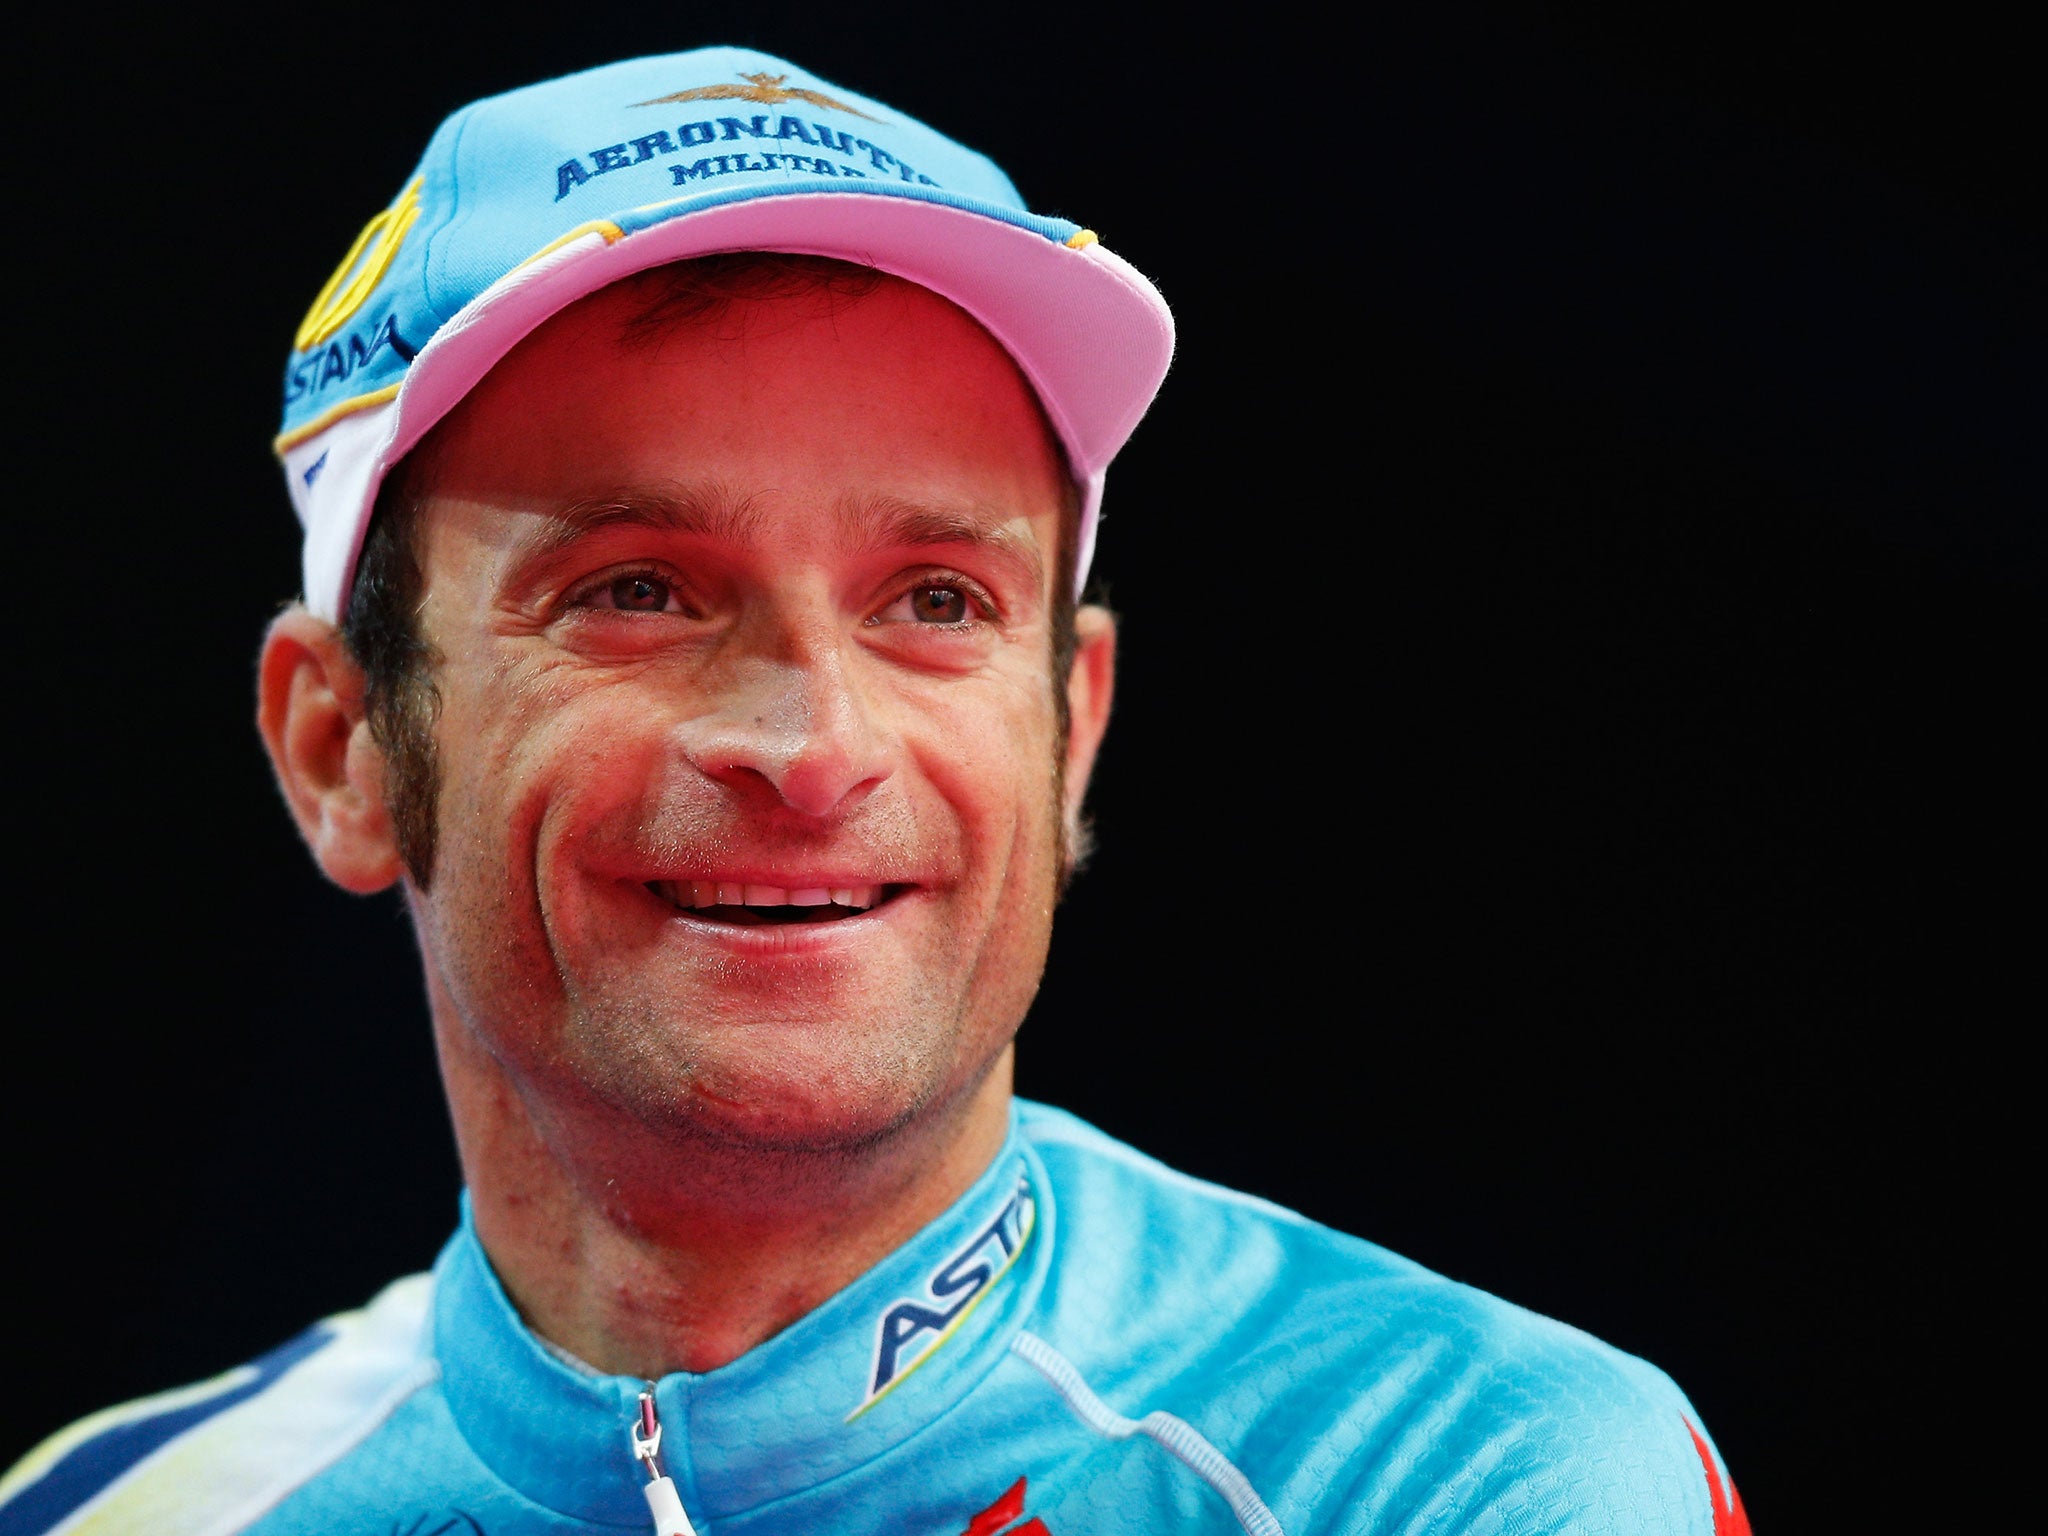 Scarponi won the opening stage of the Tour of the Alps last week